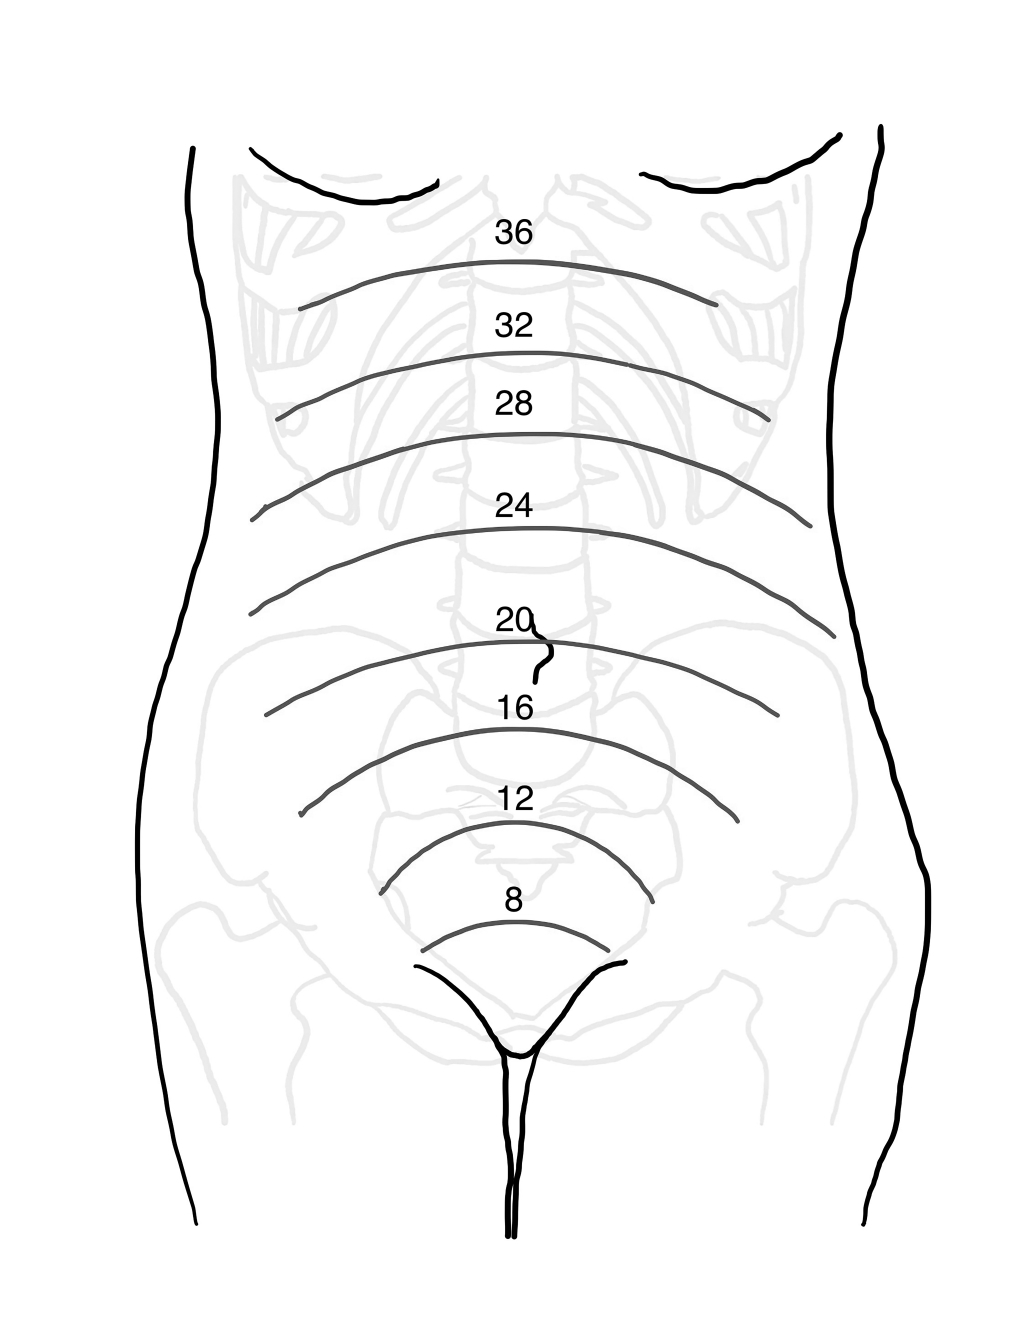 Approximate fundal height